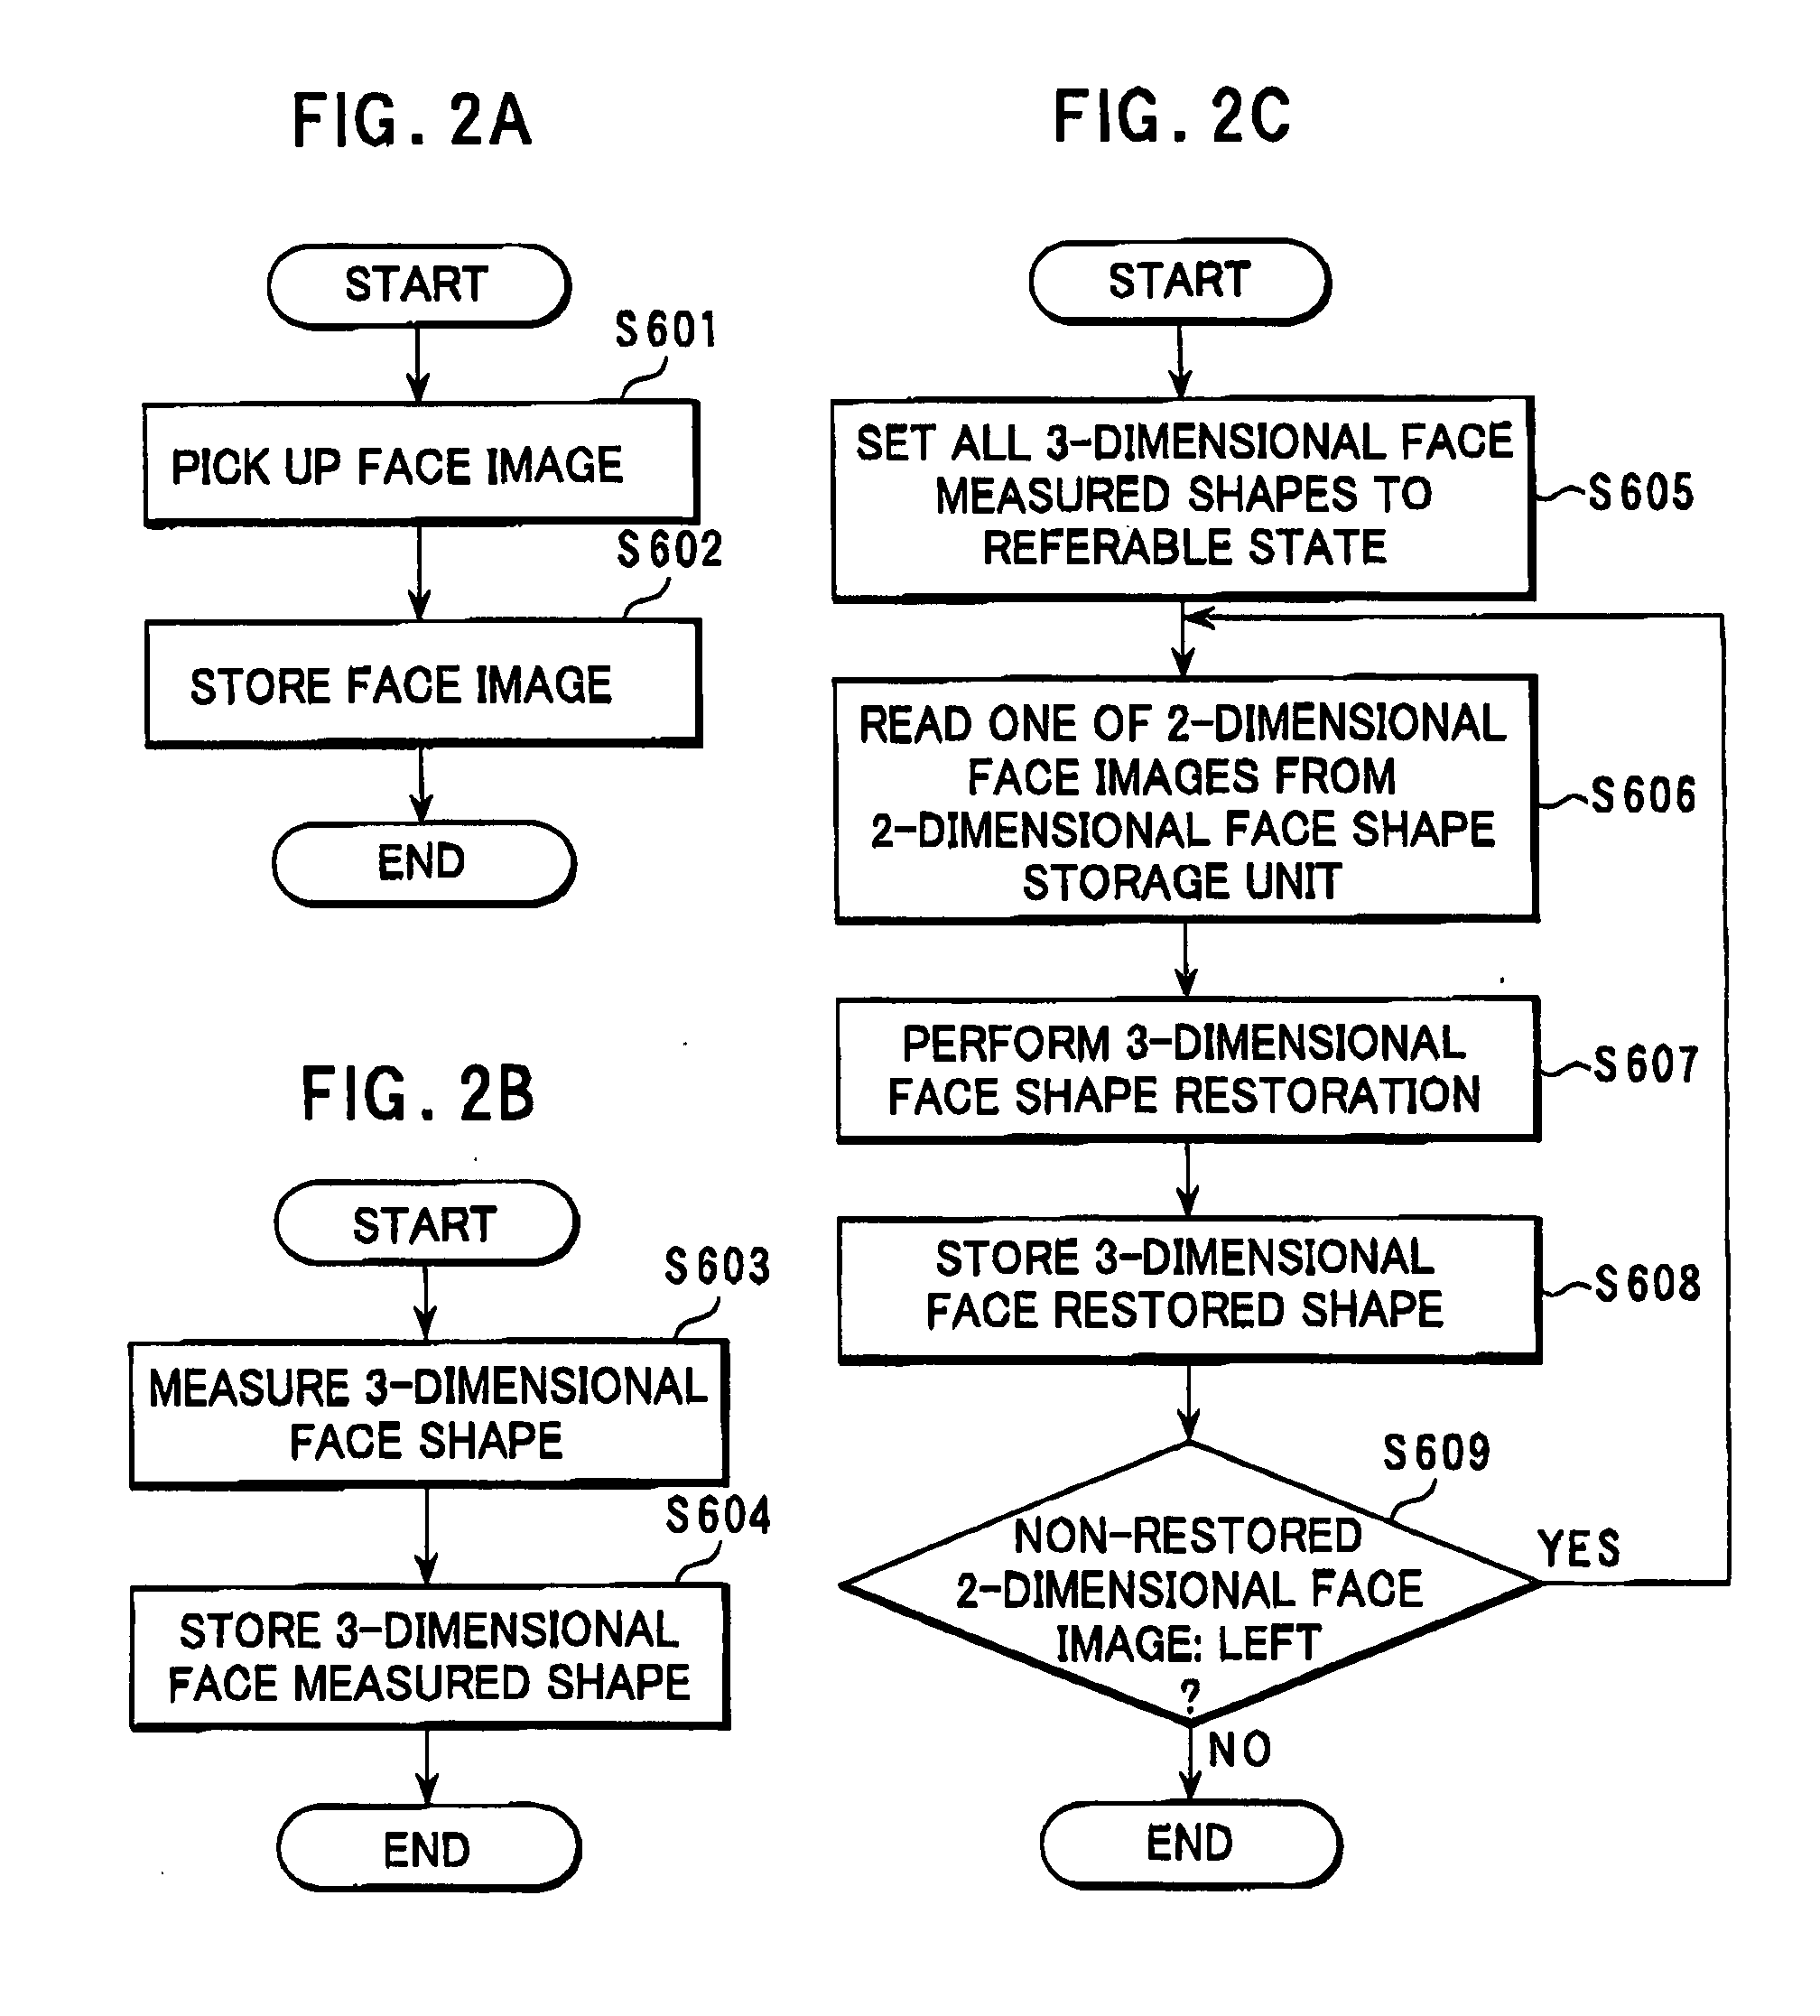 Restoring and collating system and method for 3-dimensional face data